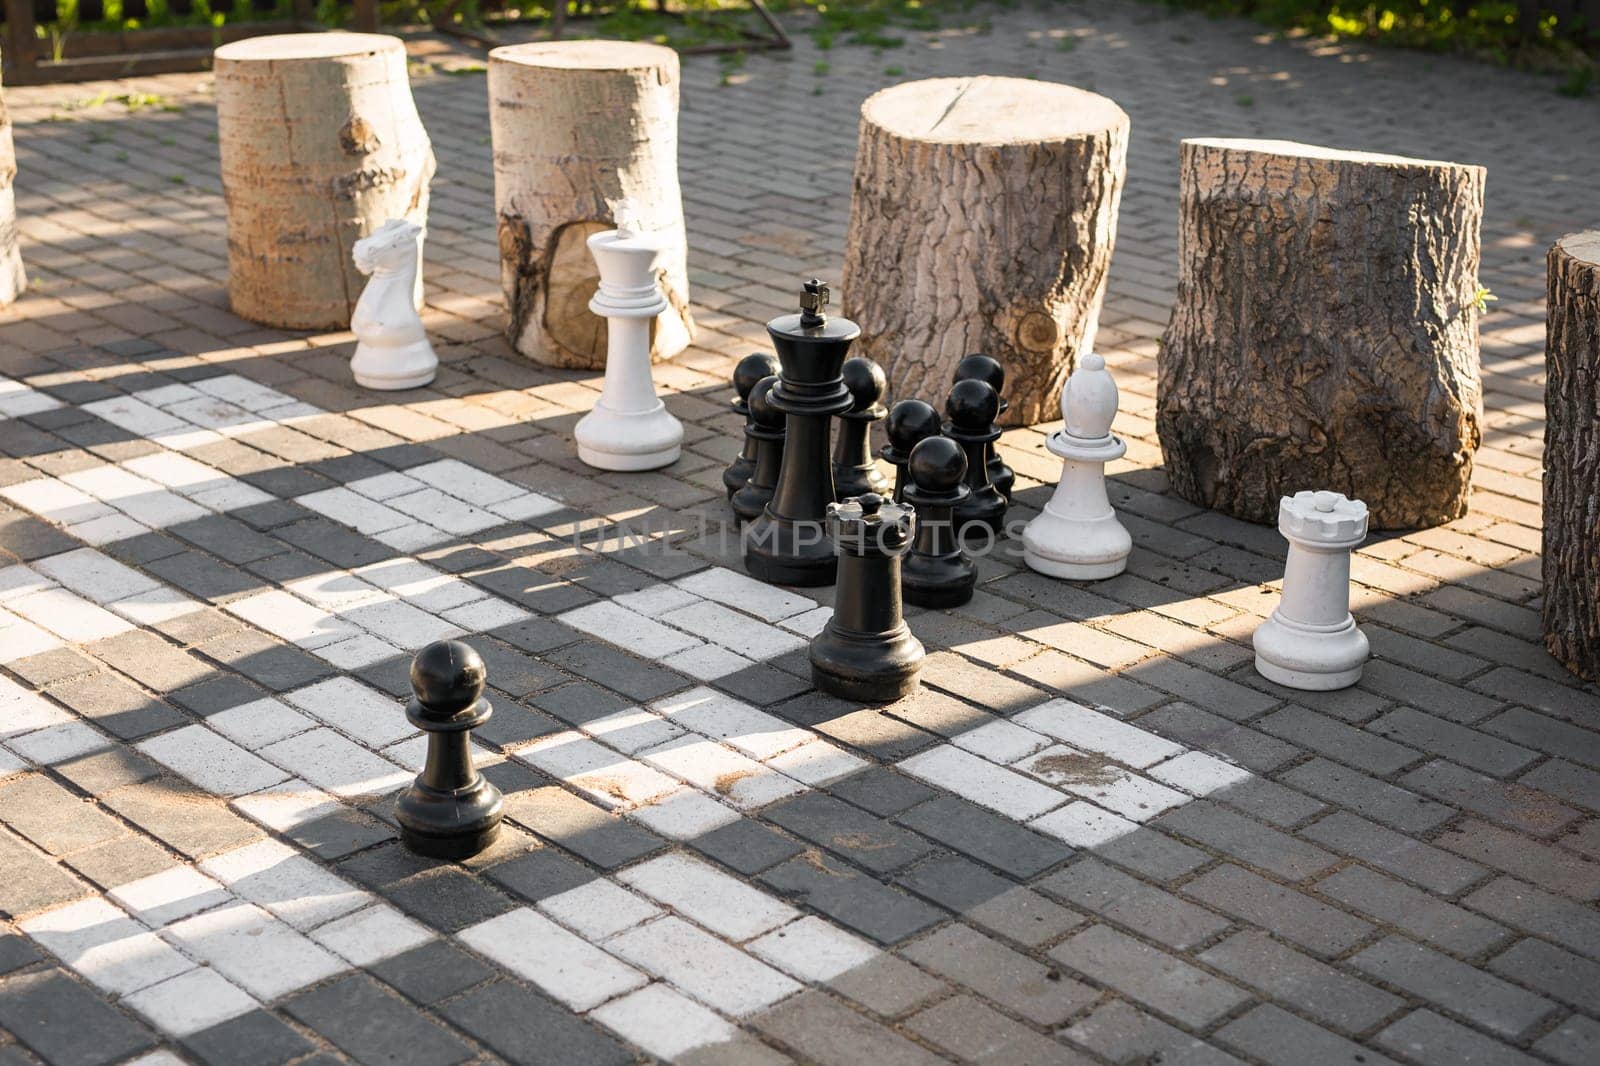 Big chess board on the street. Outdoors